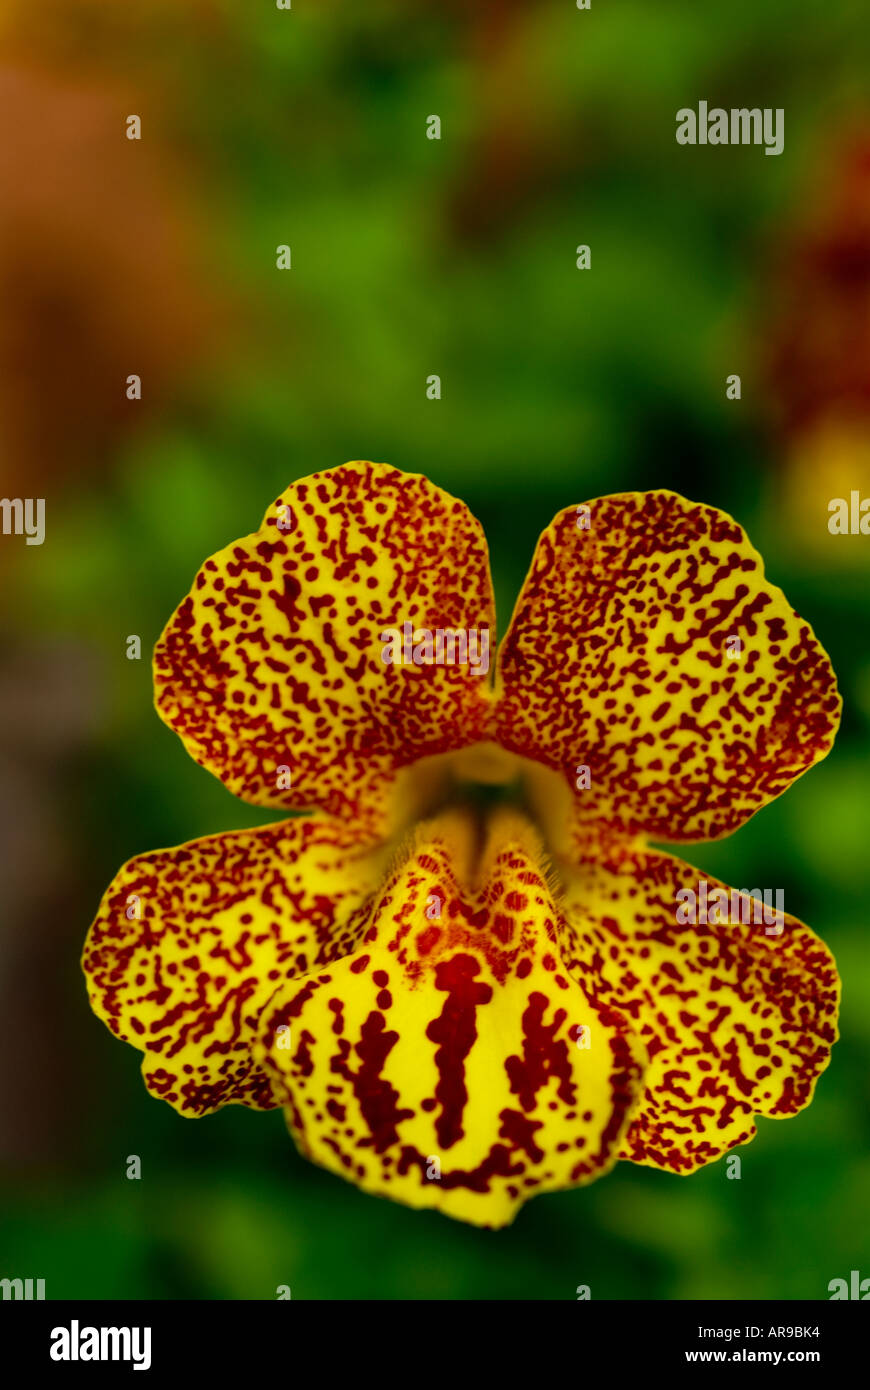 Image of a close up shot of a beautiful mimulus flower Stock Photo